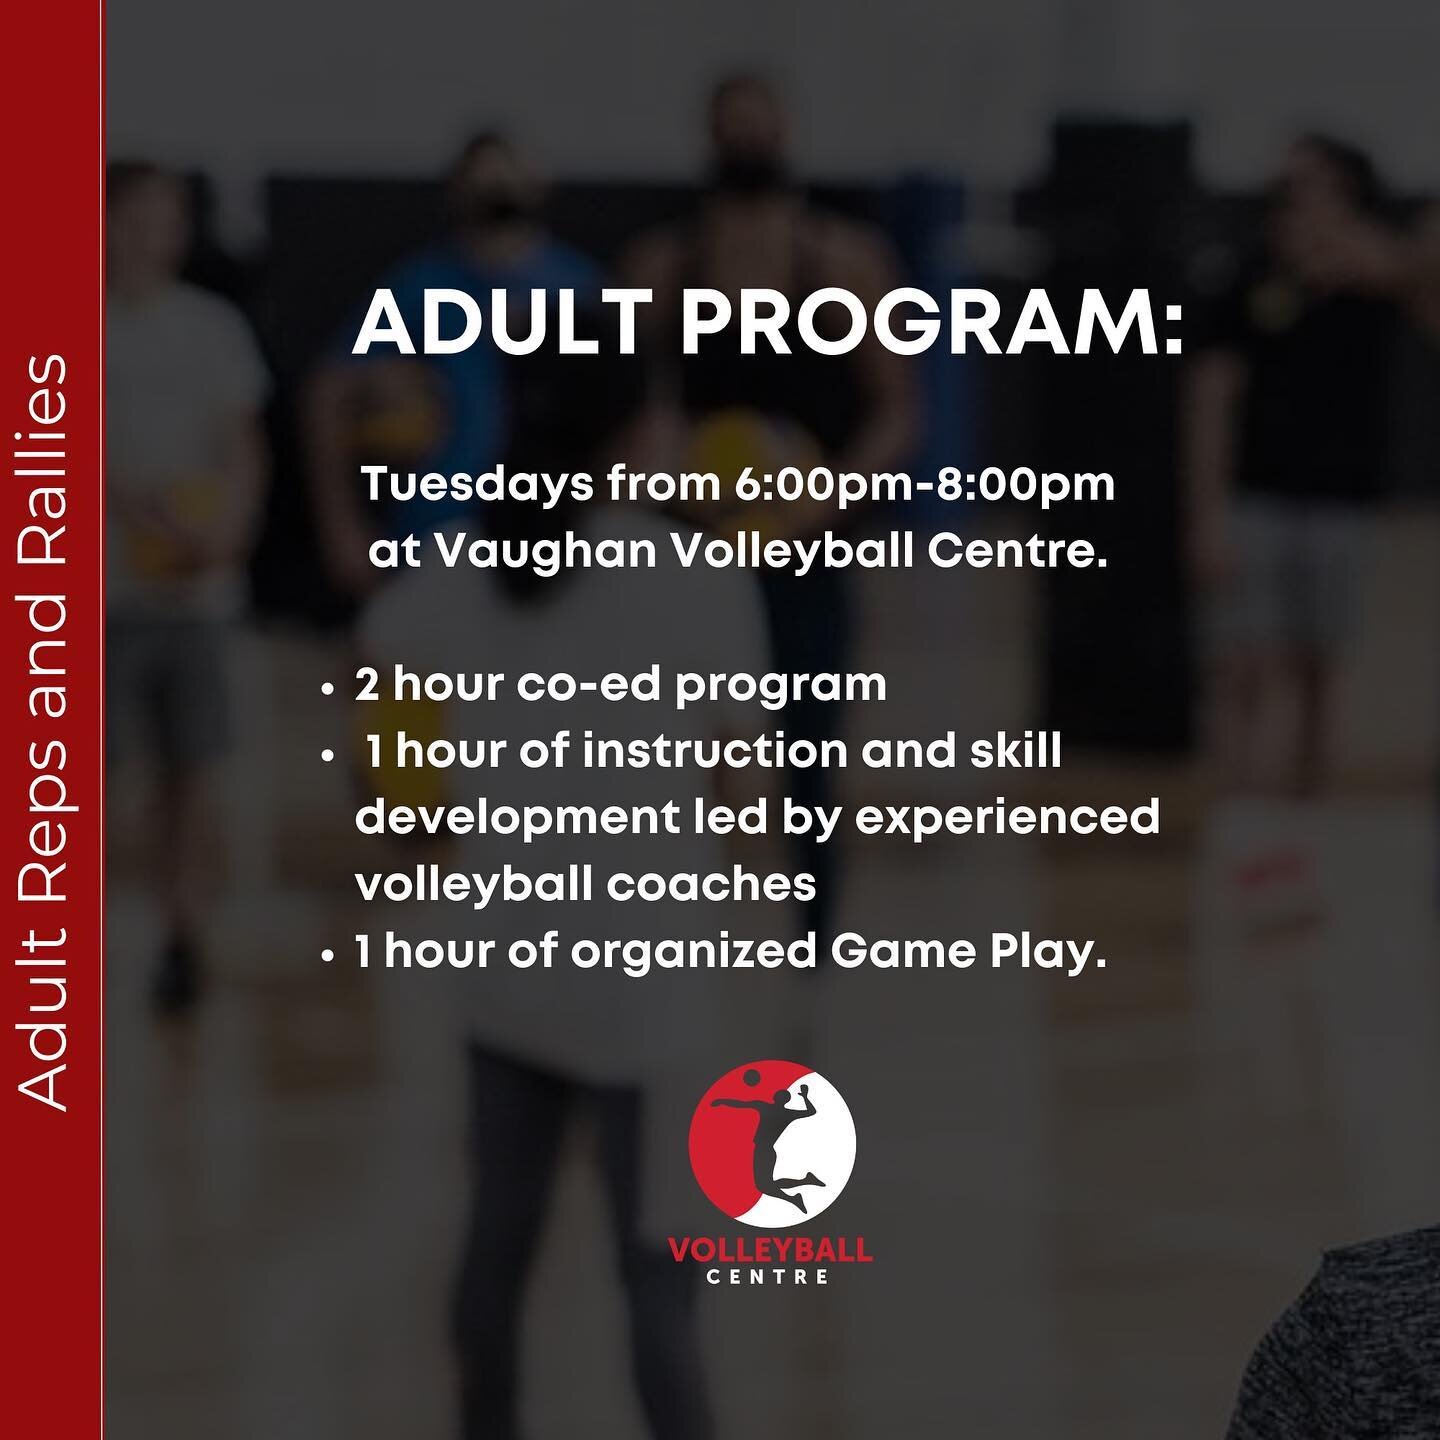 Still looking for opportunities to both further develop your volleyball skills and game play IQ?

Register now for our ADULT Reps and Rallies program as spots are limited! 

Visit our website volleyballcentre.com/adult-programs for the registration l